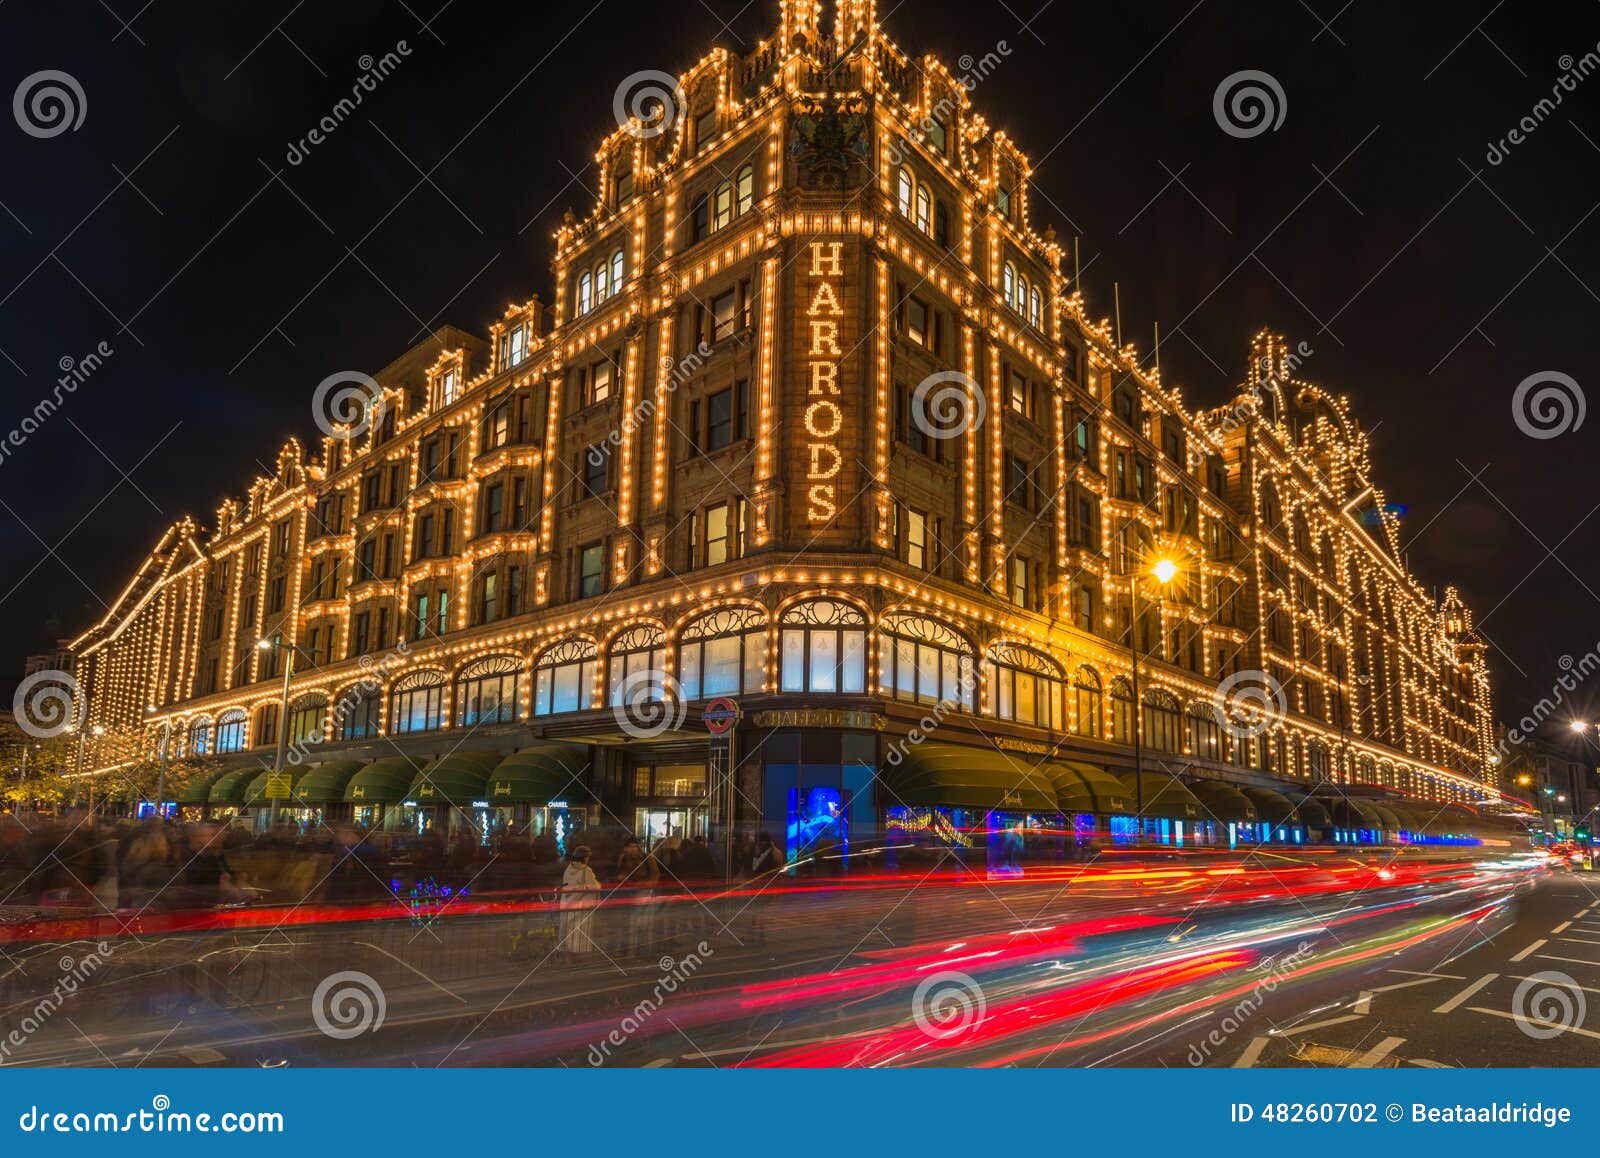 Harrods Store in London, UK with Christmas Decorations Editorial ...